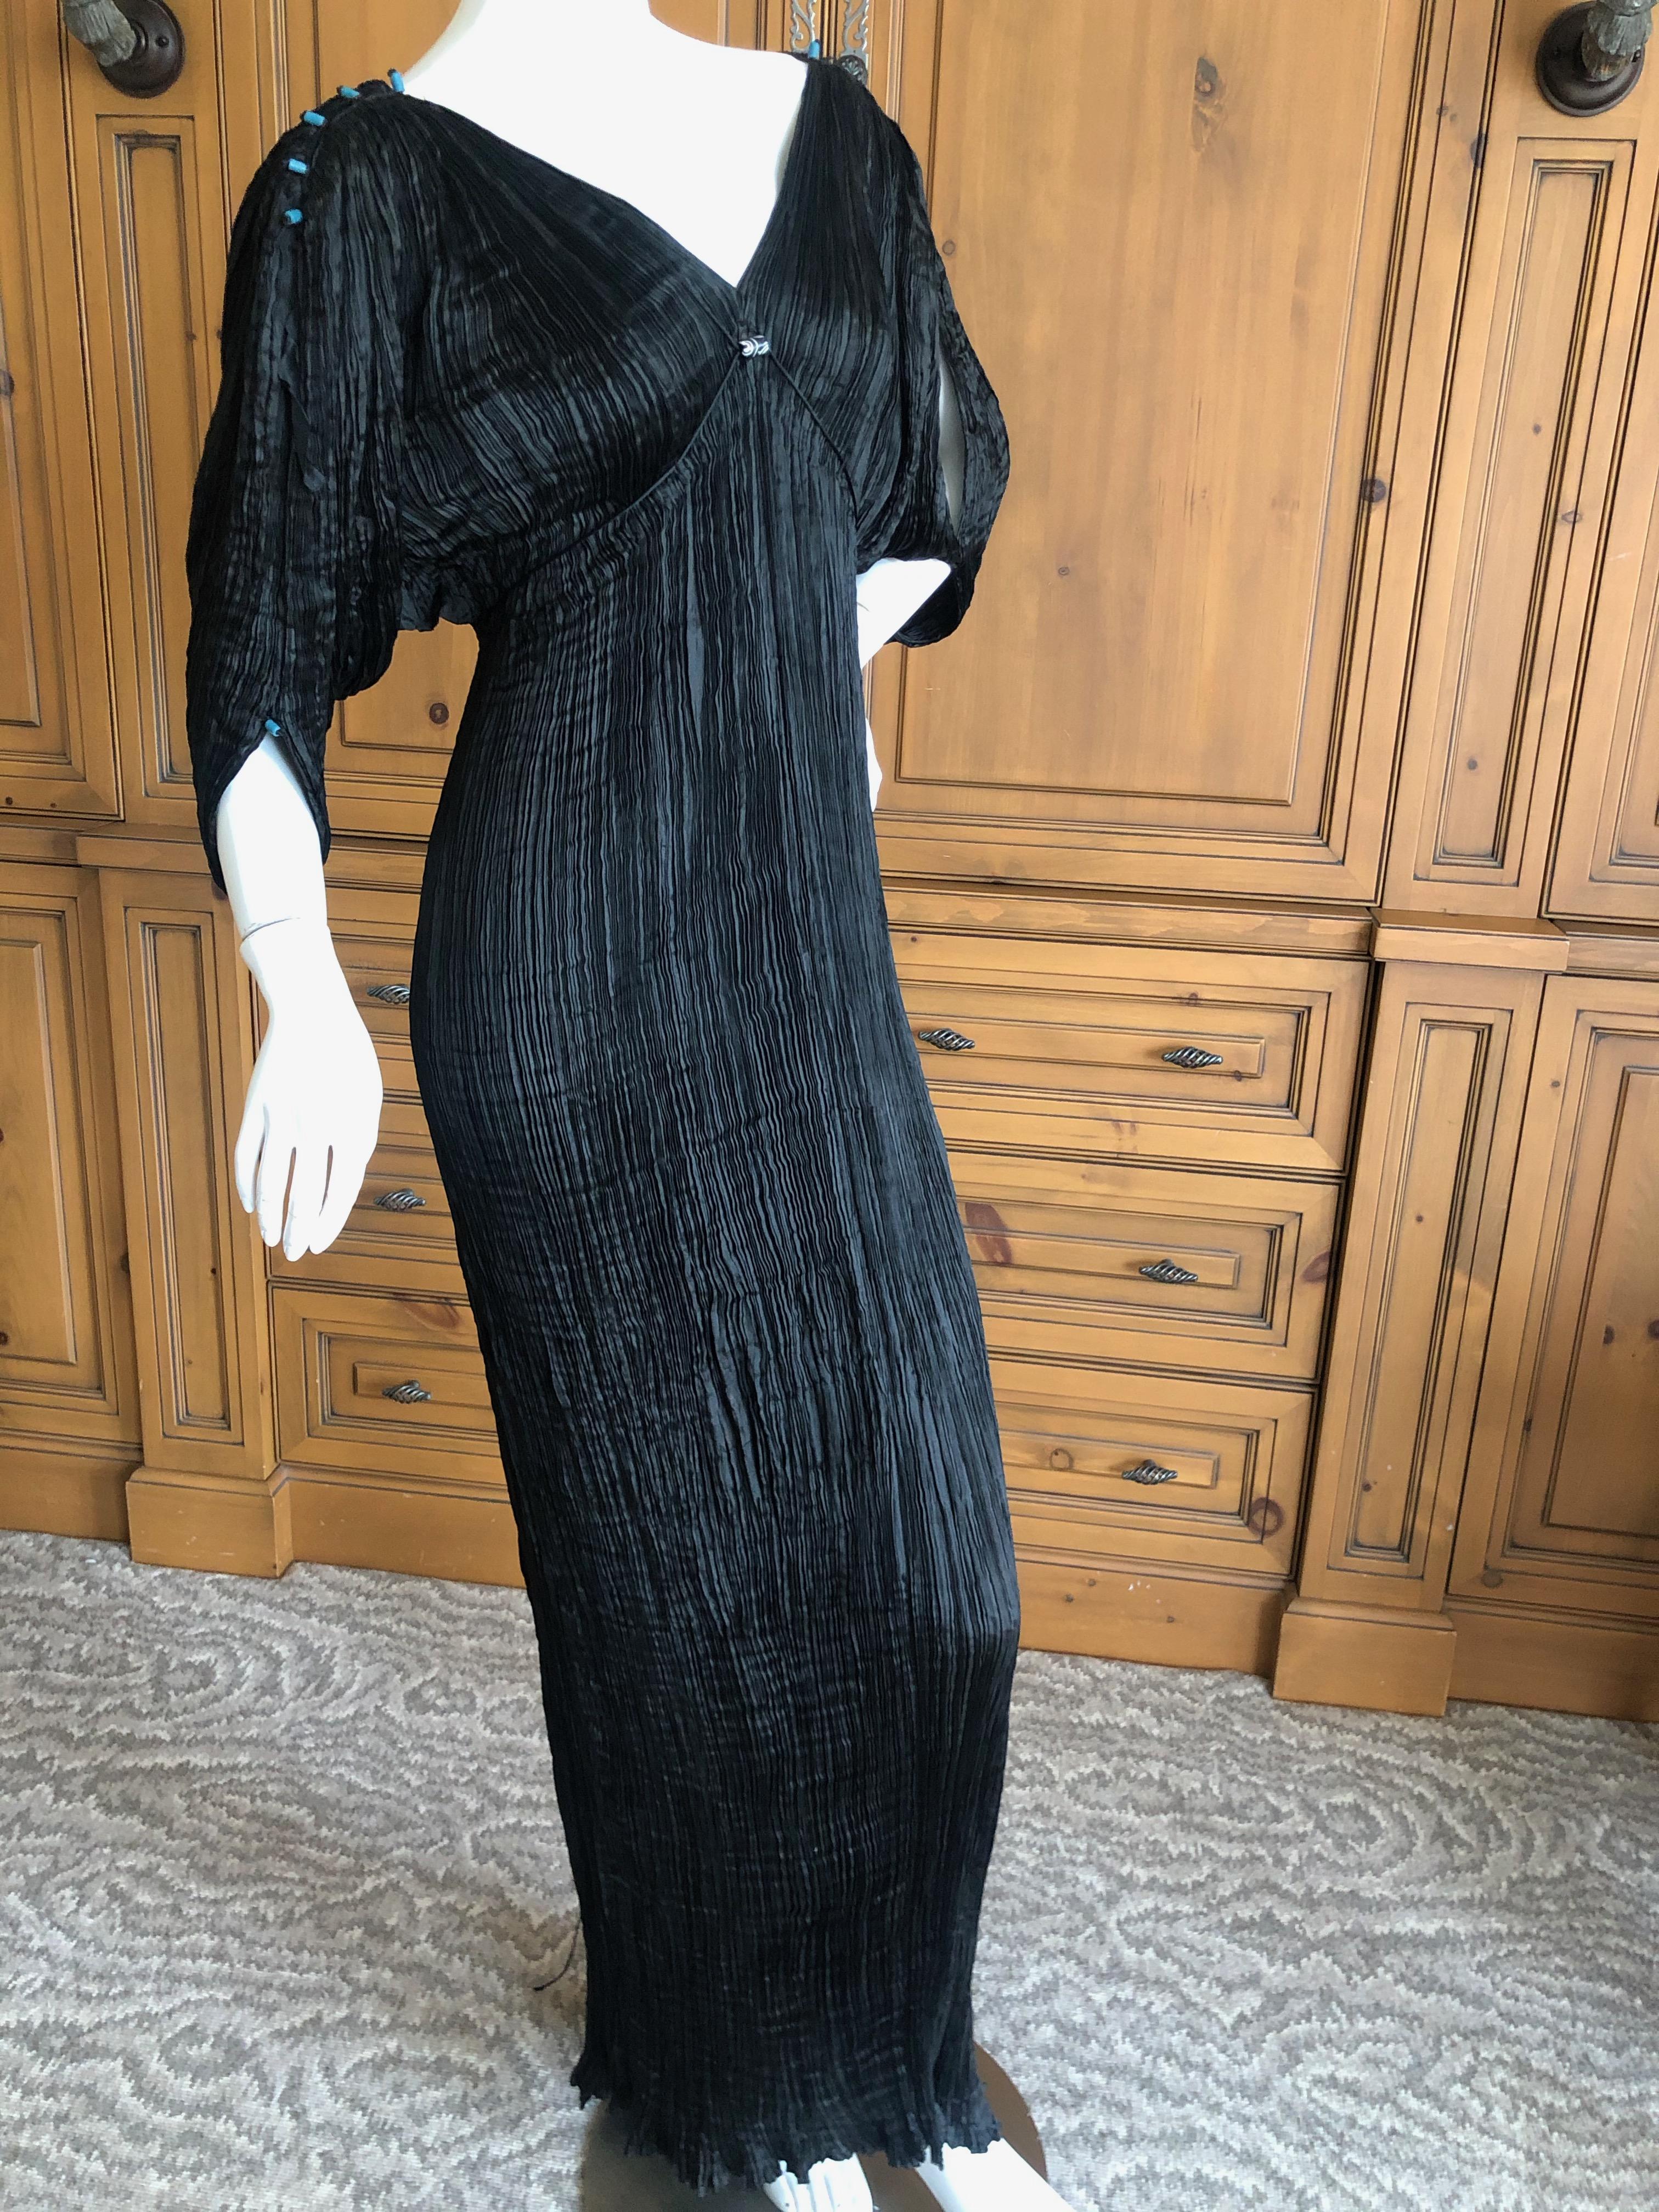 Mariano Fortuny Black Delphos Dress
Mariano Fortuny revolutionized fashion when he eliminated the corset and designed the pleated Delphos gown to be worn without restrictive undergarments.
Created by a secret pleating method and constructed with